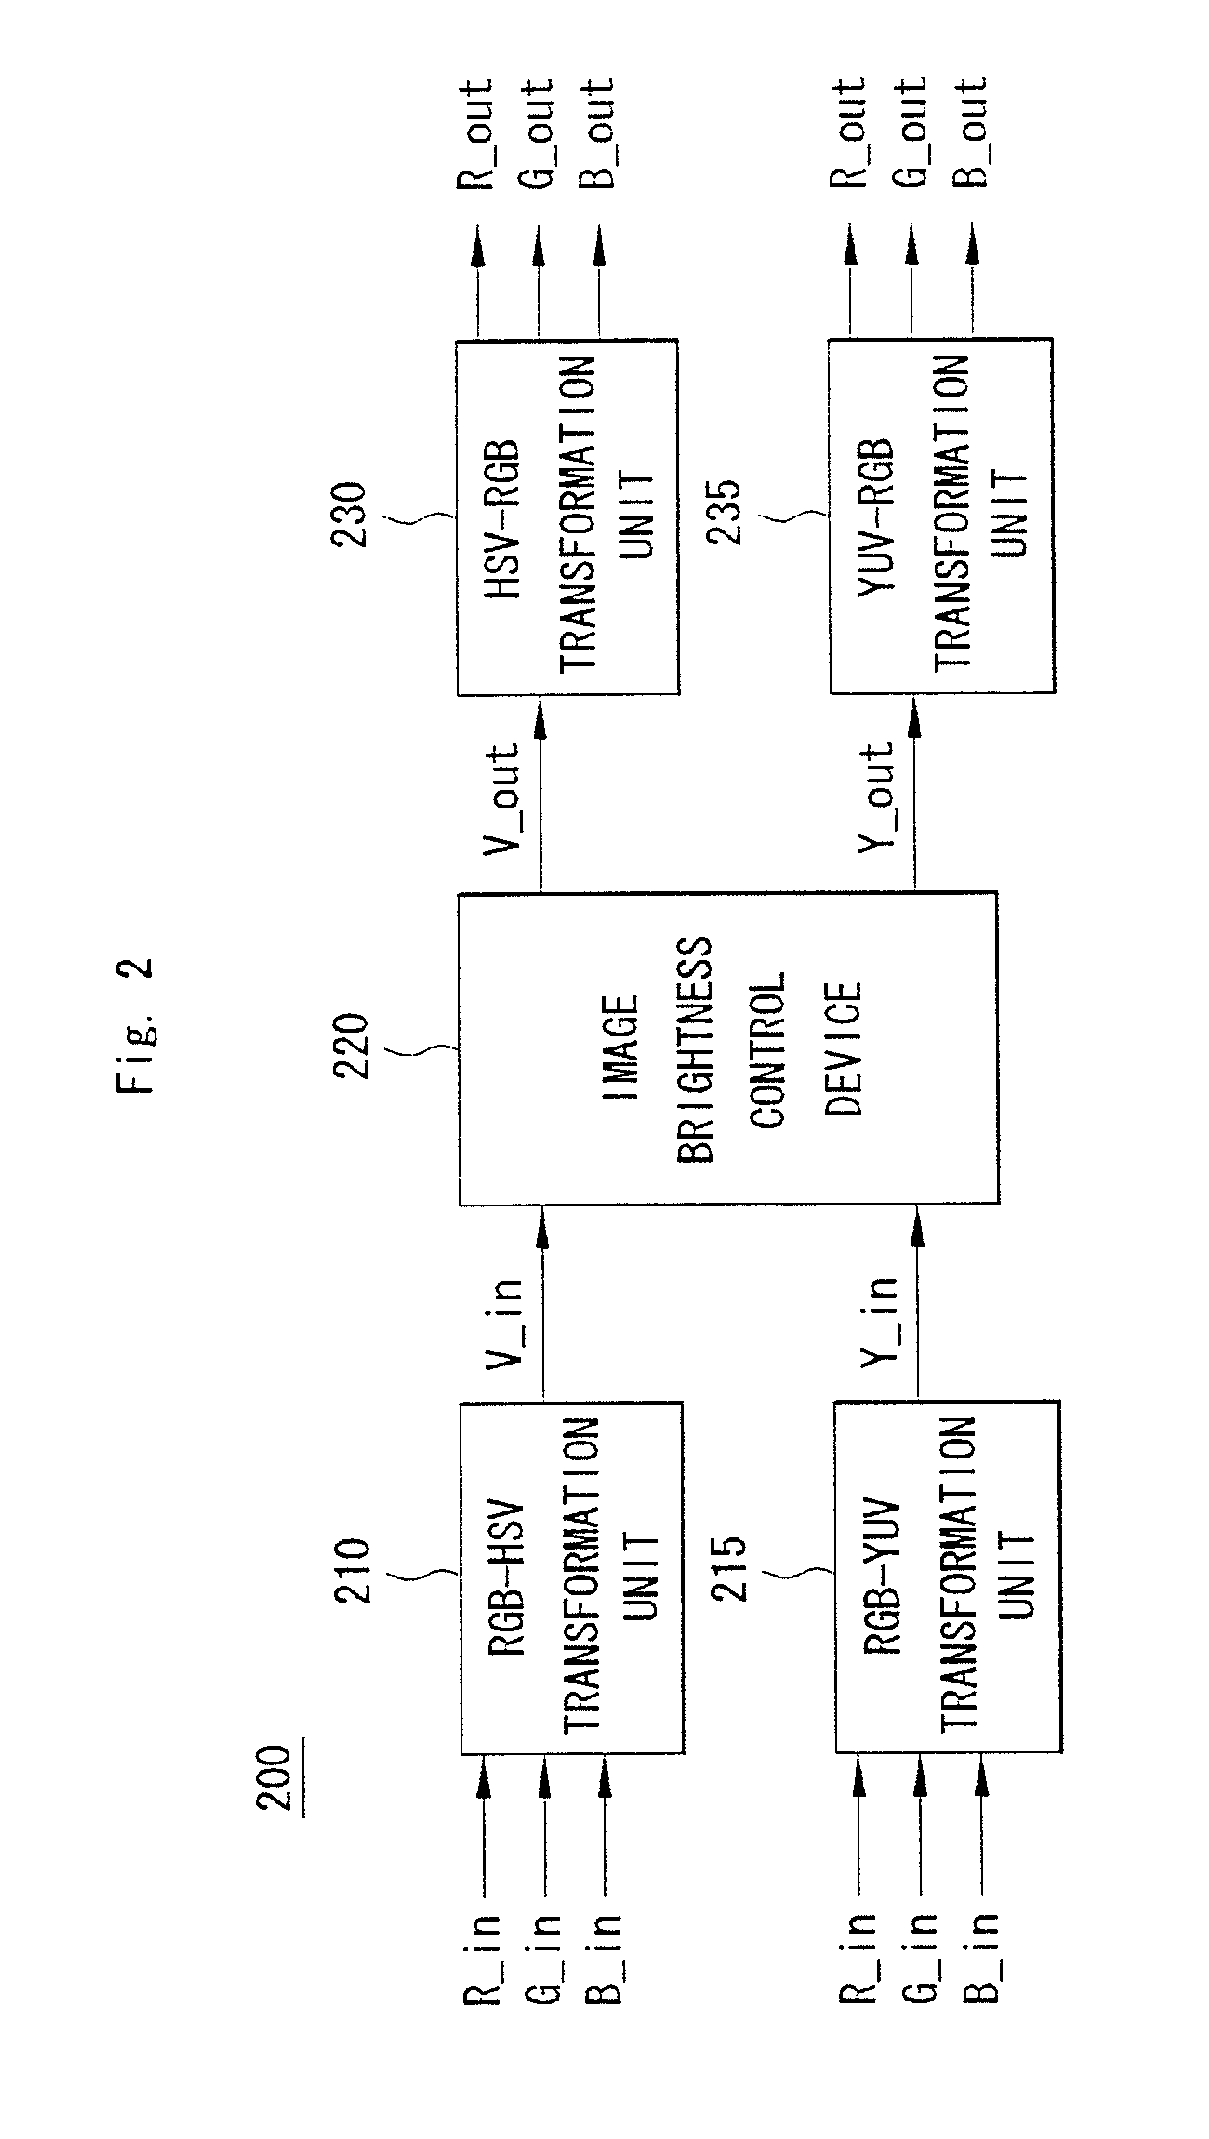 Image brightness controlling apparatus and method thereof